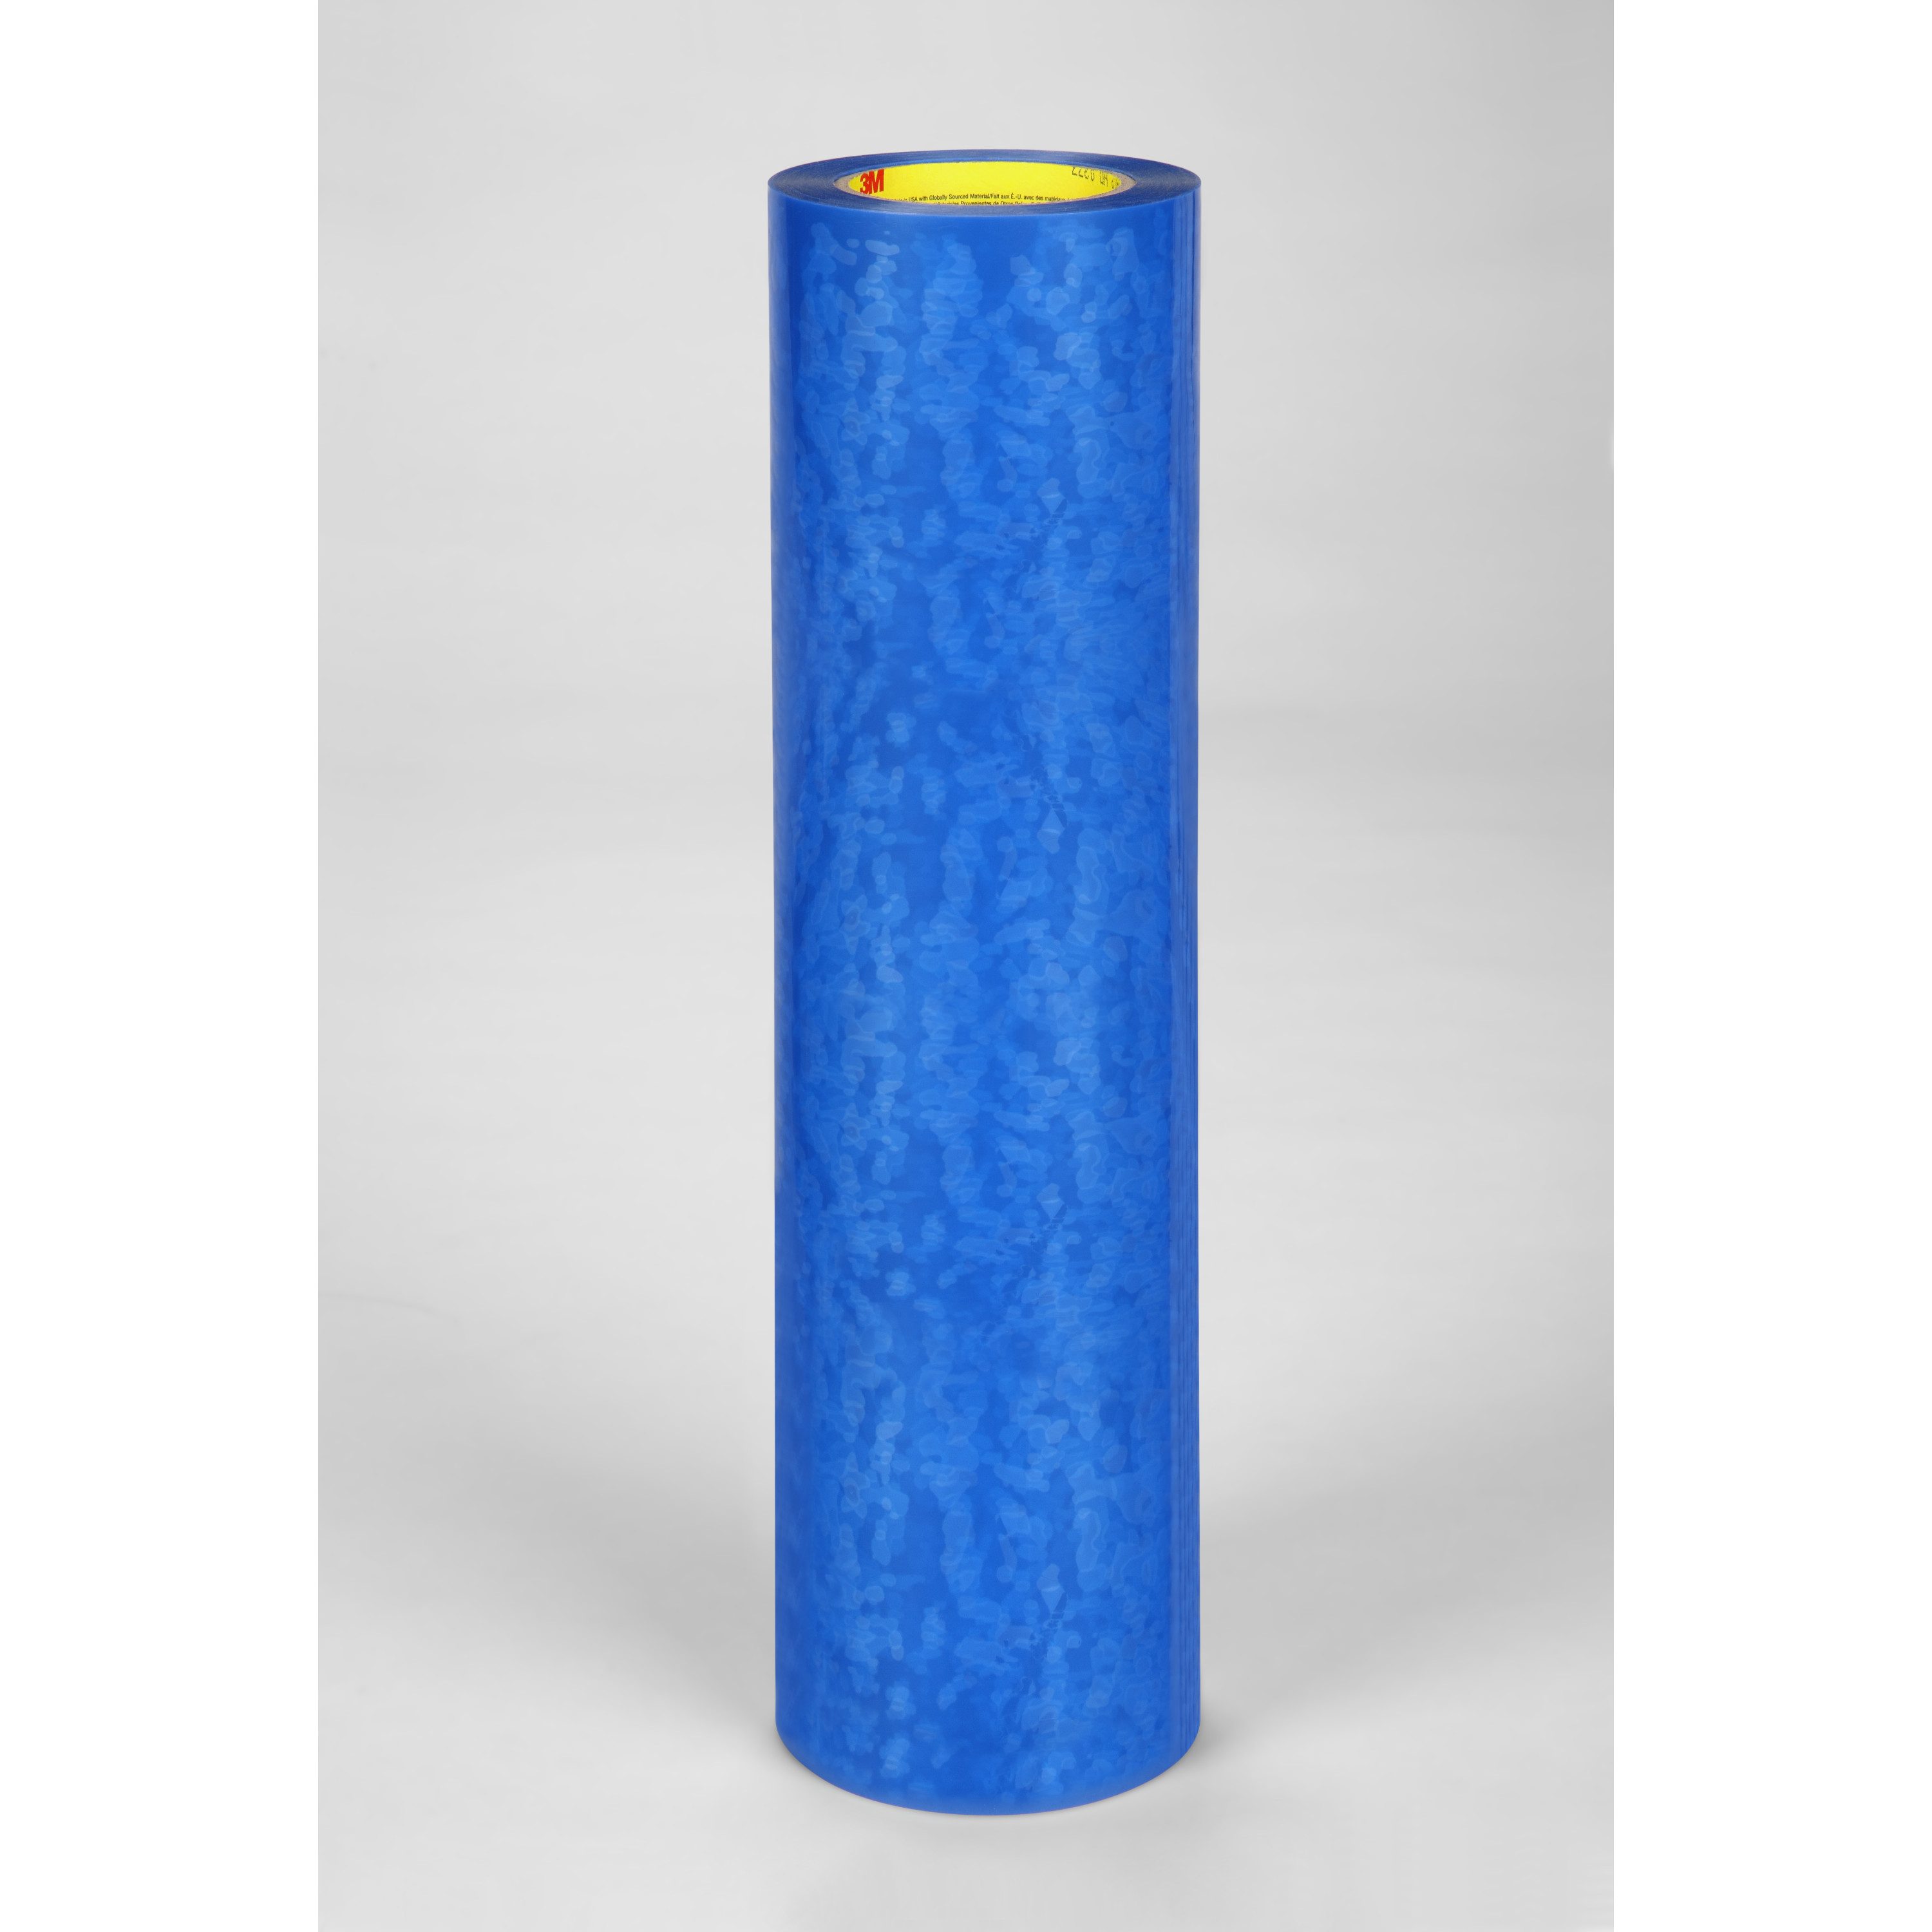 3M™ Polyester Tape 8901, Blue, 18 in x 72 yd, 0.9 mil, 1 Roll/Case